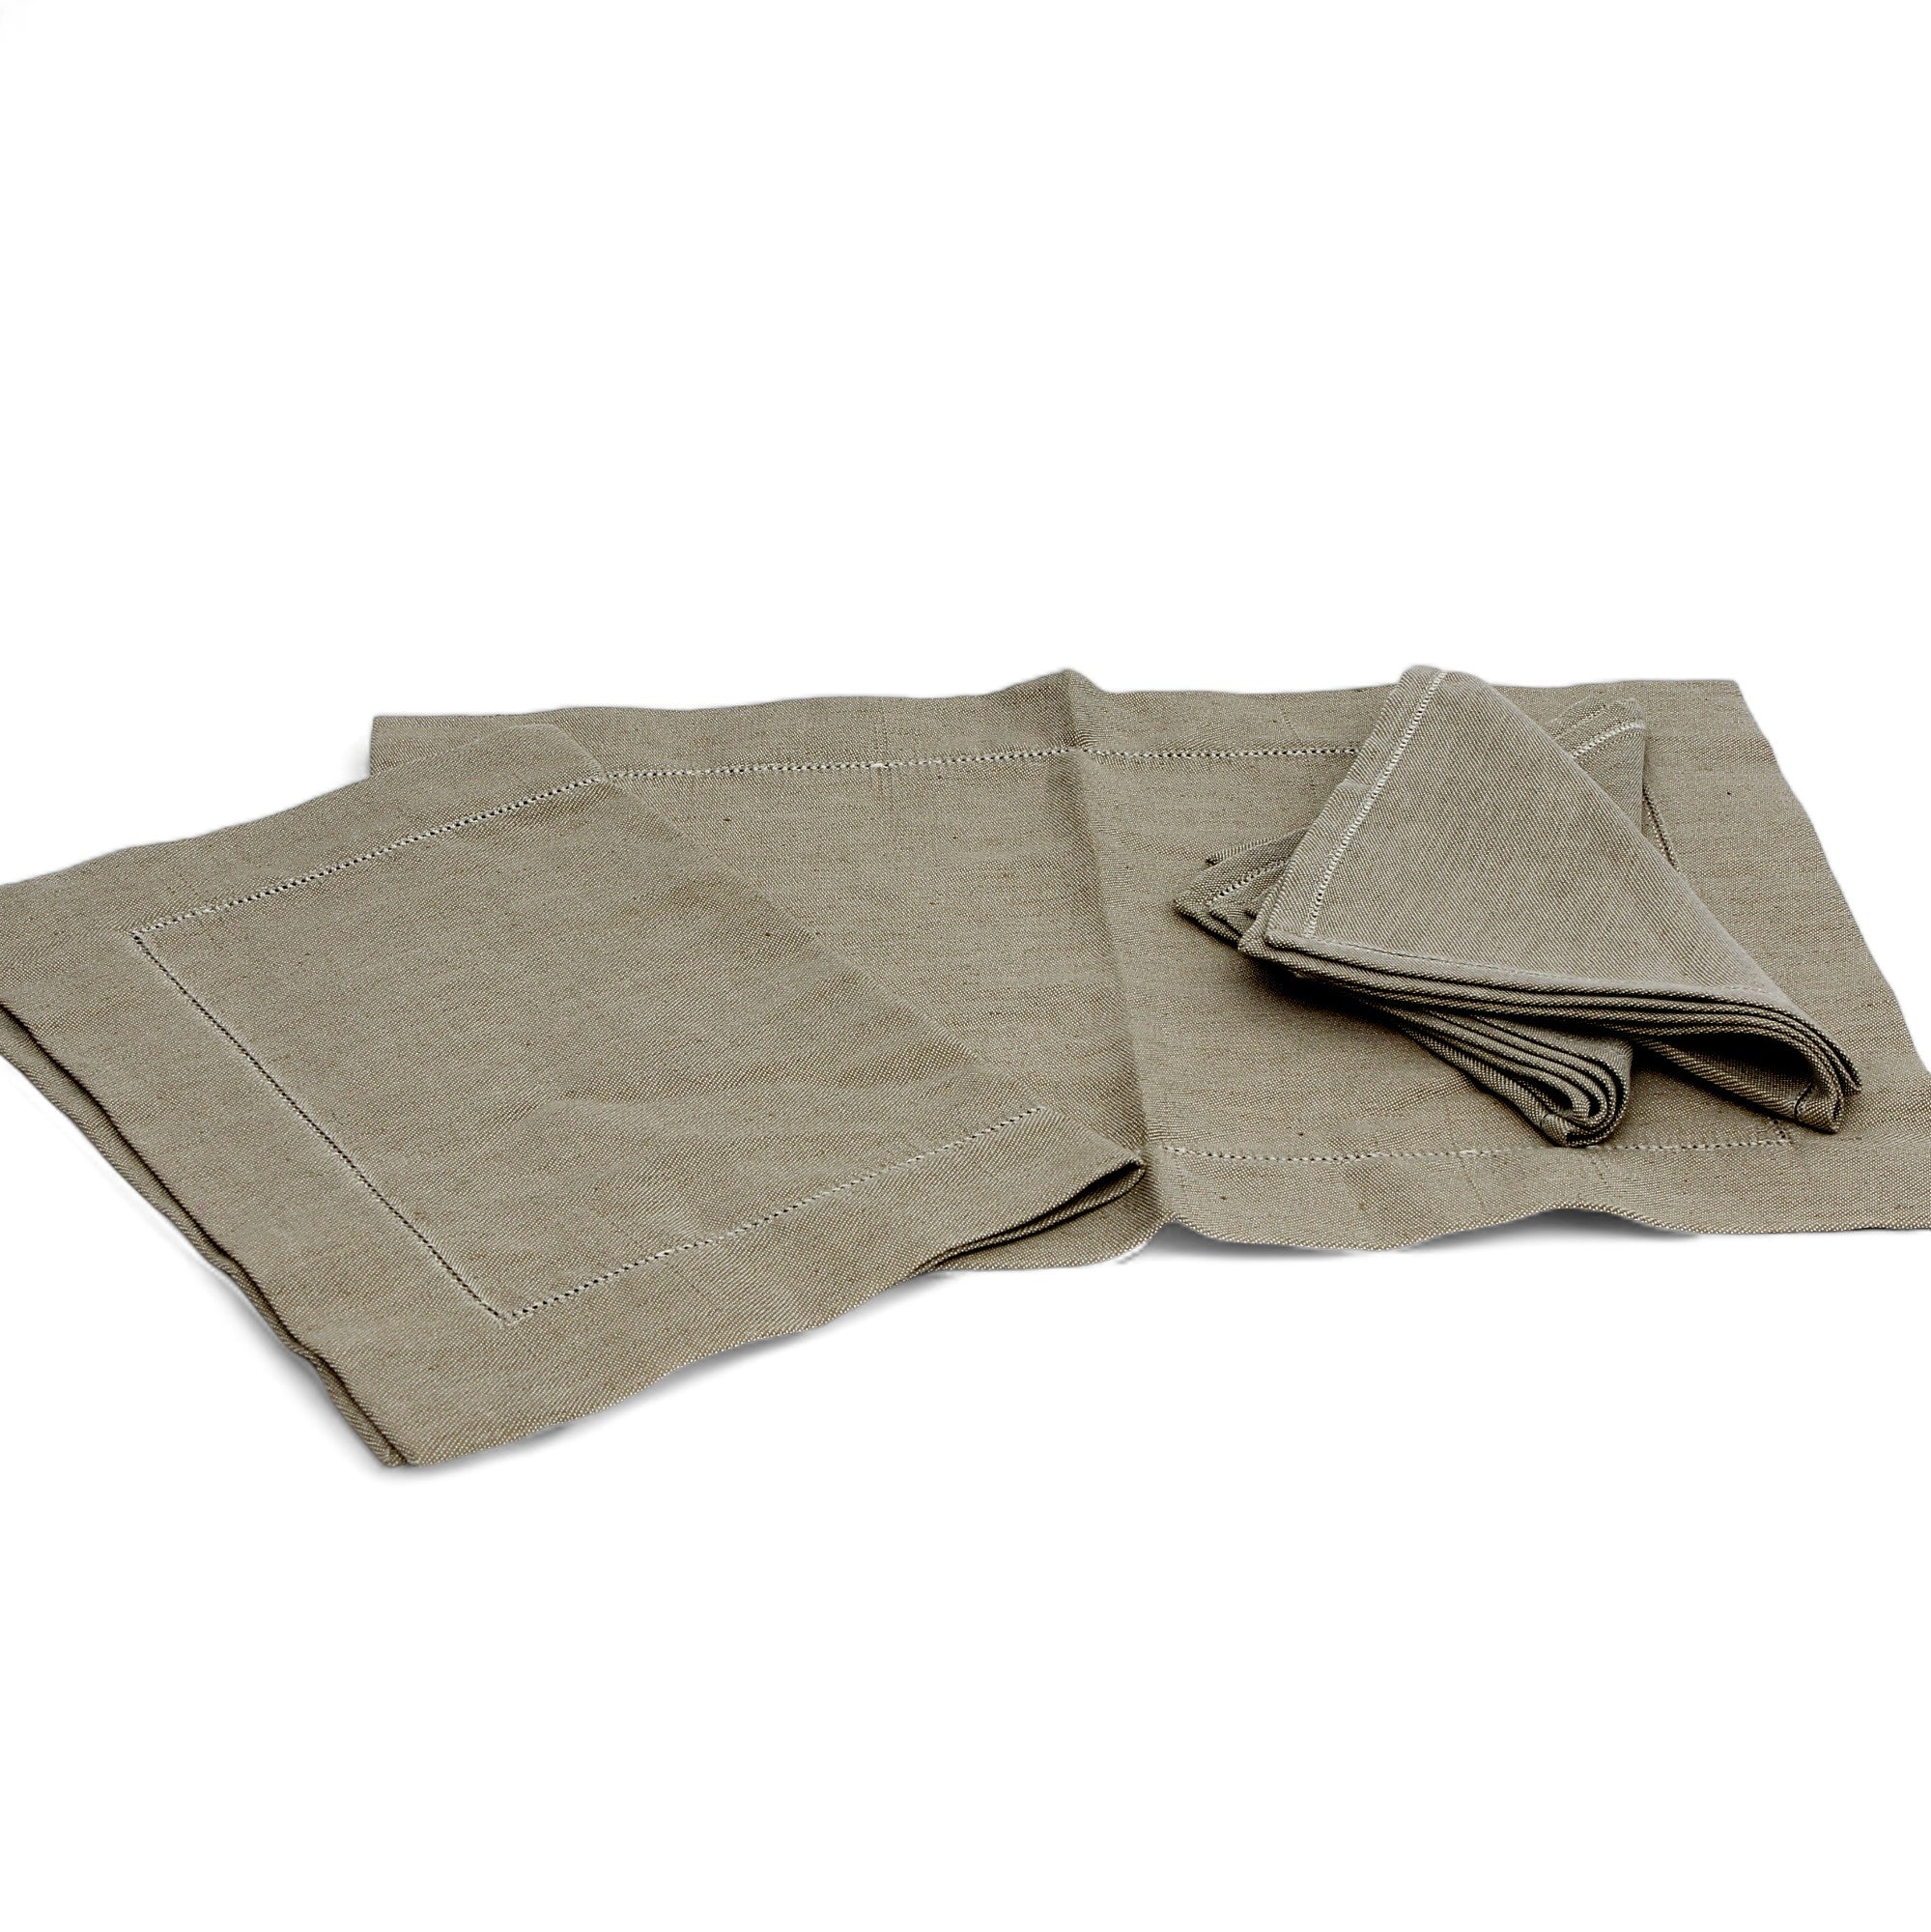 TESSITURE PARDI: Set of TWO Reversible Placemats and TWO Reversible Napkins Dinner Size Large - (60% Linen and 40% Cotton) NATURAL Color